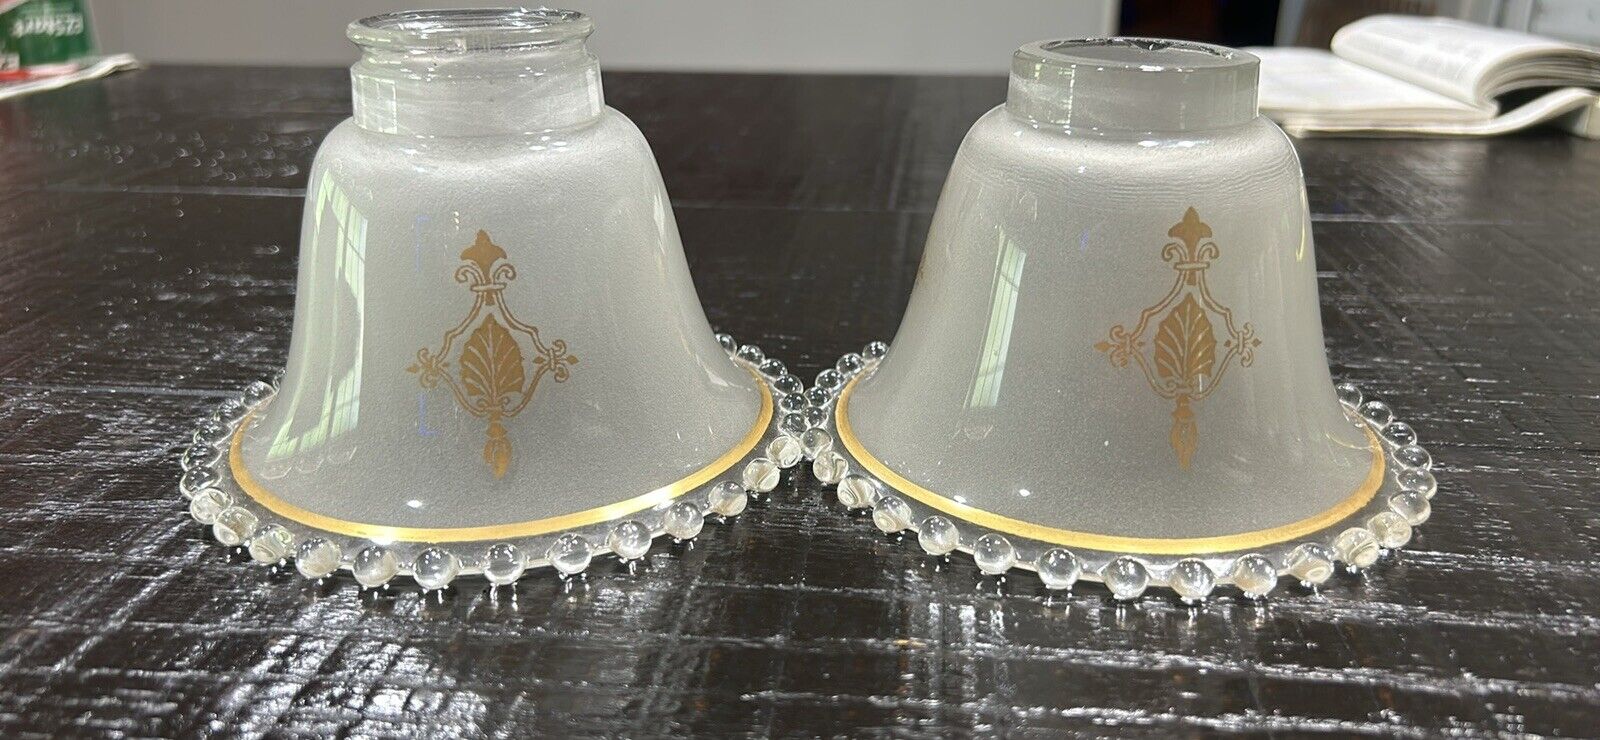 2 Imperial Candlewick Glass Light Shade Frosted Gold Decoration Excellent Con.